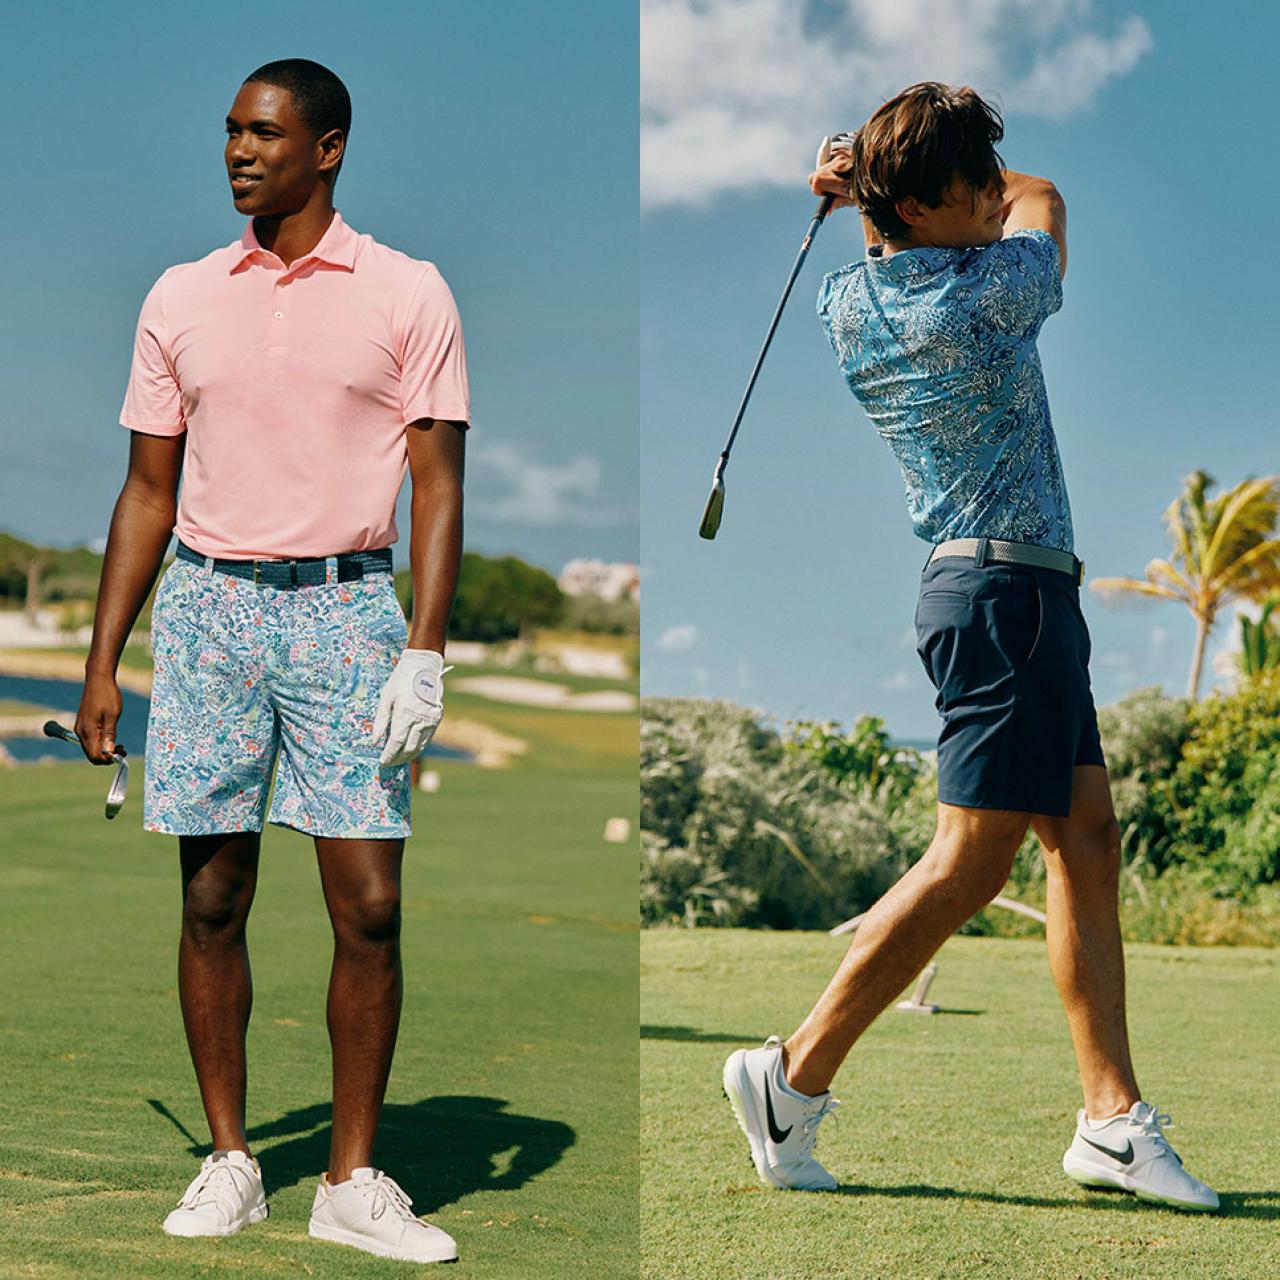 A look at Lilly Pulitzer's collaborative men's golf collection